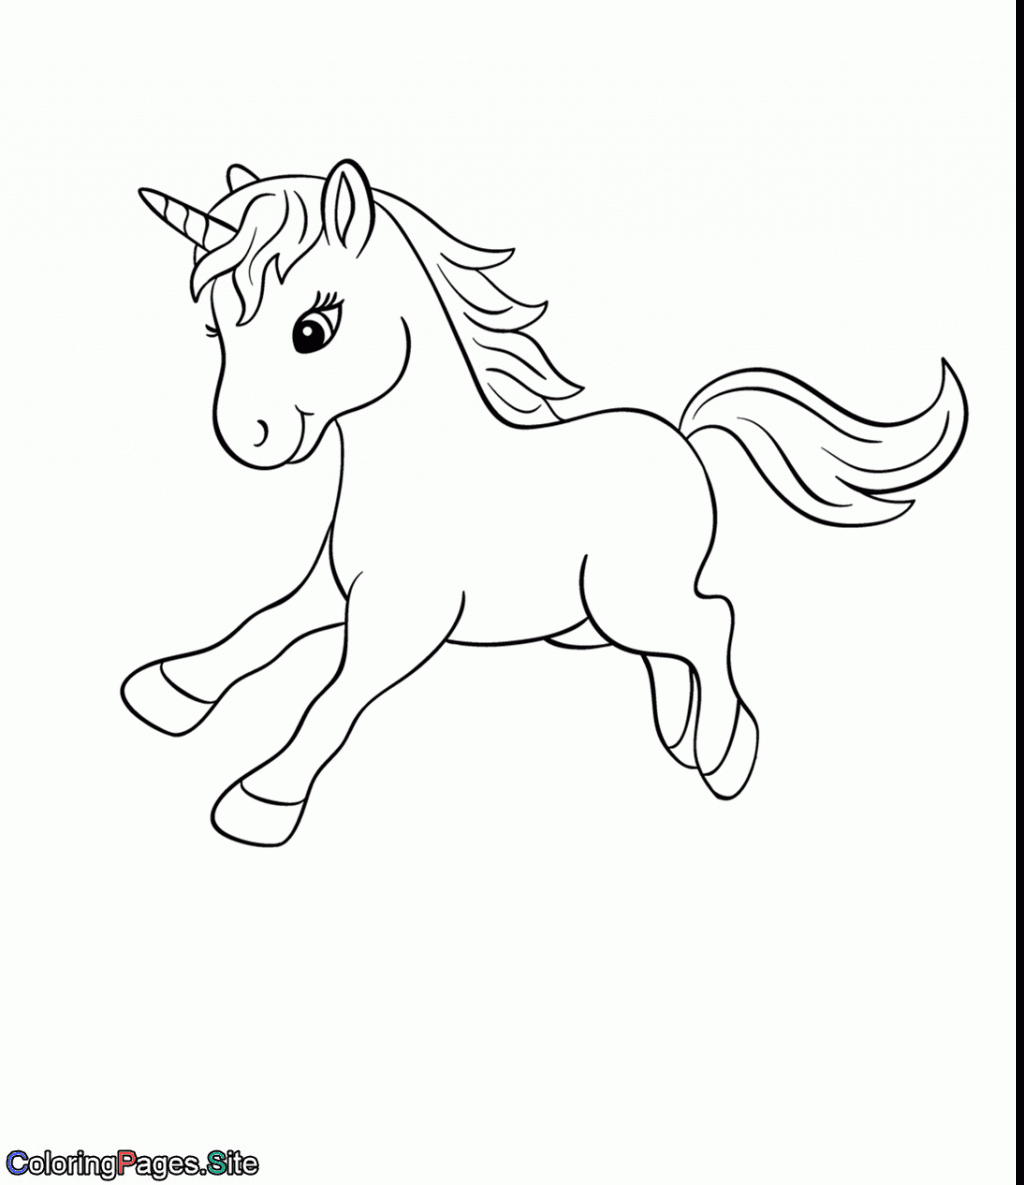 Unicorn Coloring Pages Online Coloring Pages Coloring Pages Awesome Online Games Printable